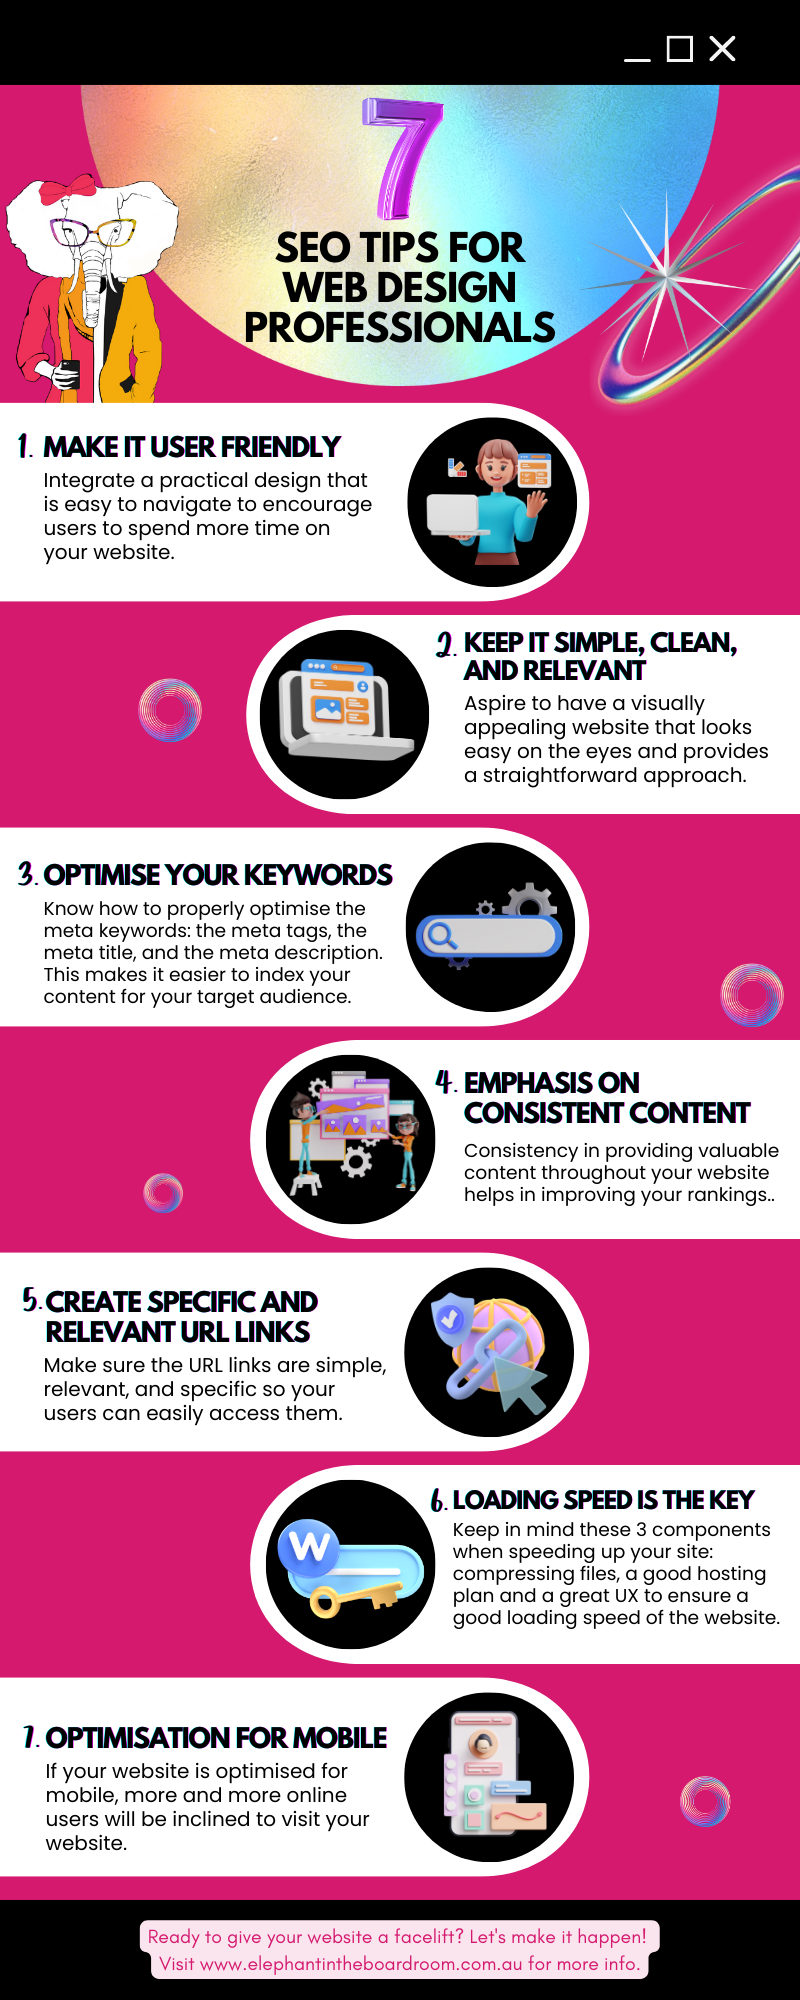 7 SEO Tips for Web Design Professionals [Infographic]